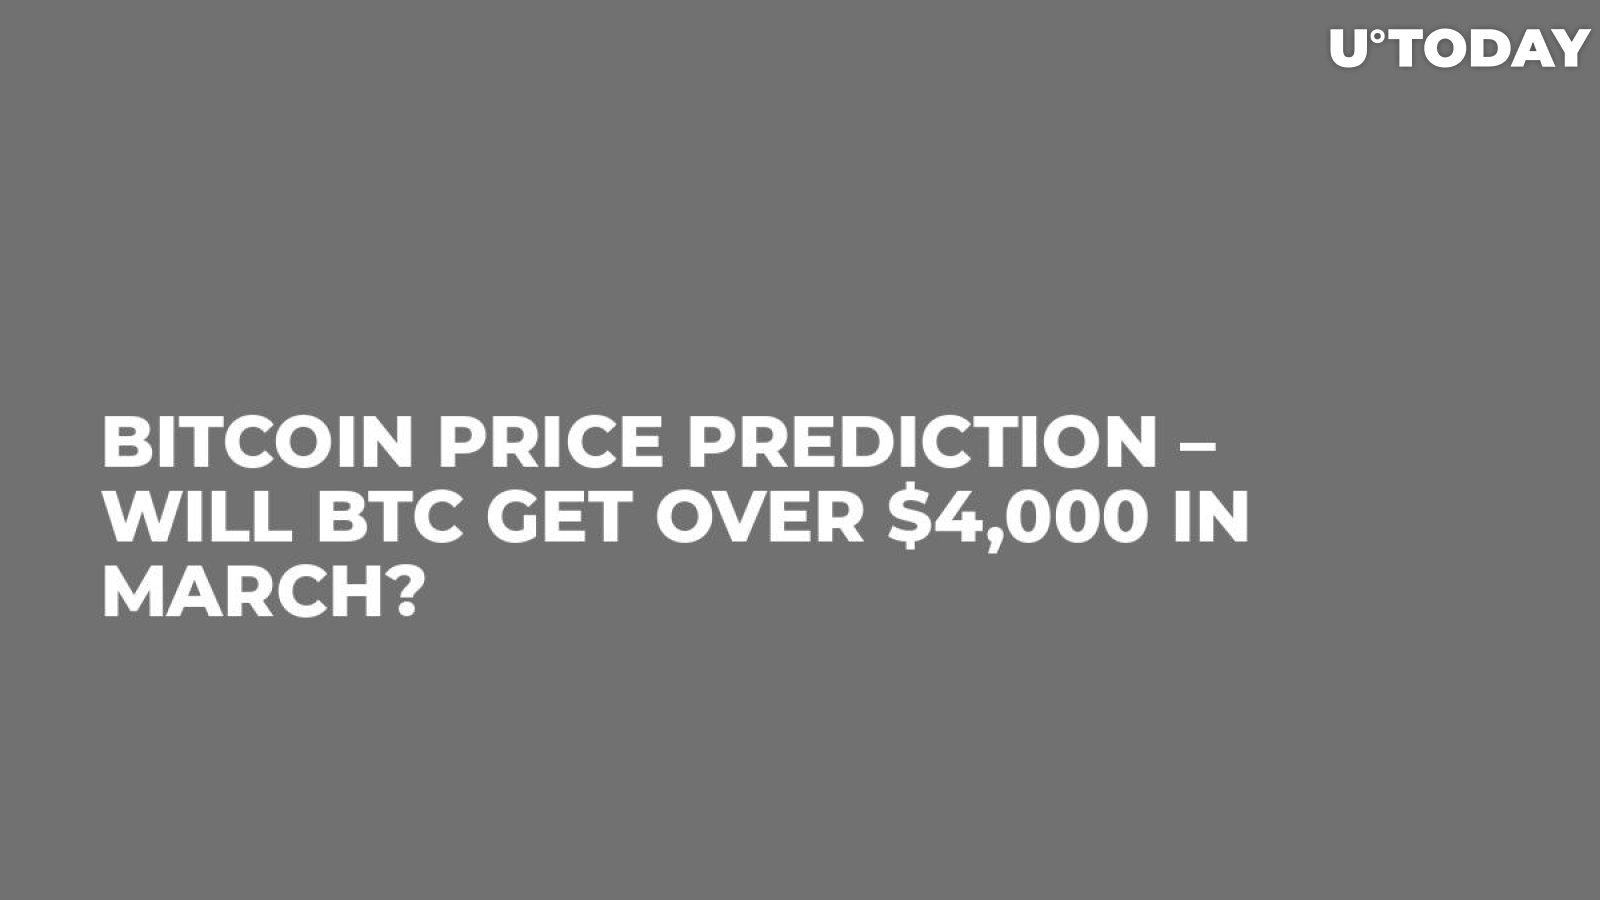 Bitcoin Price Prediction – Will BTC Get over $4,000 in March?